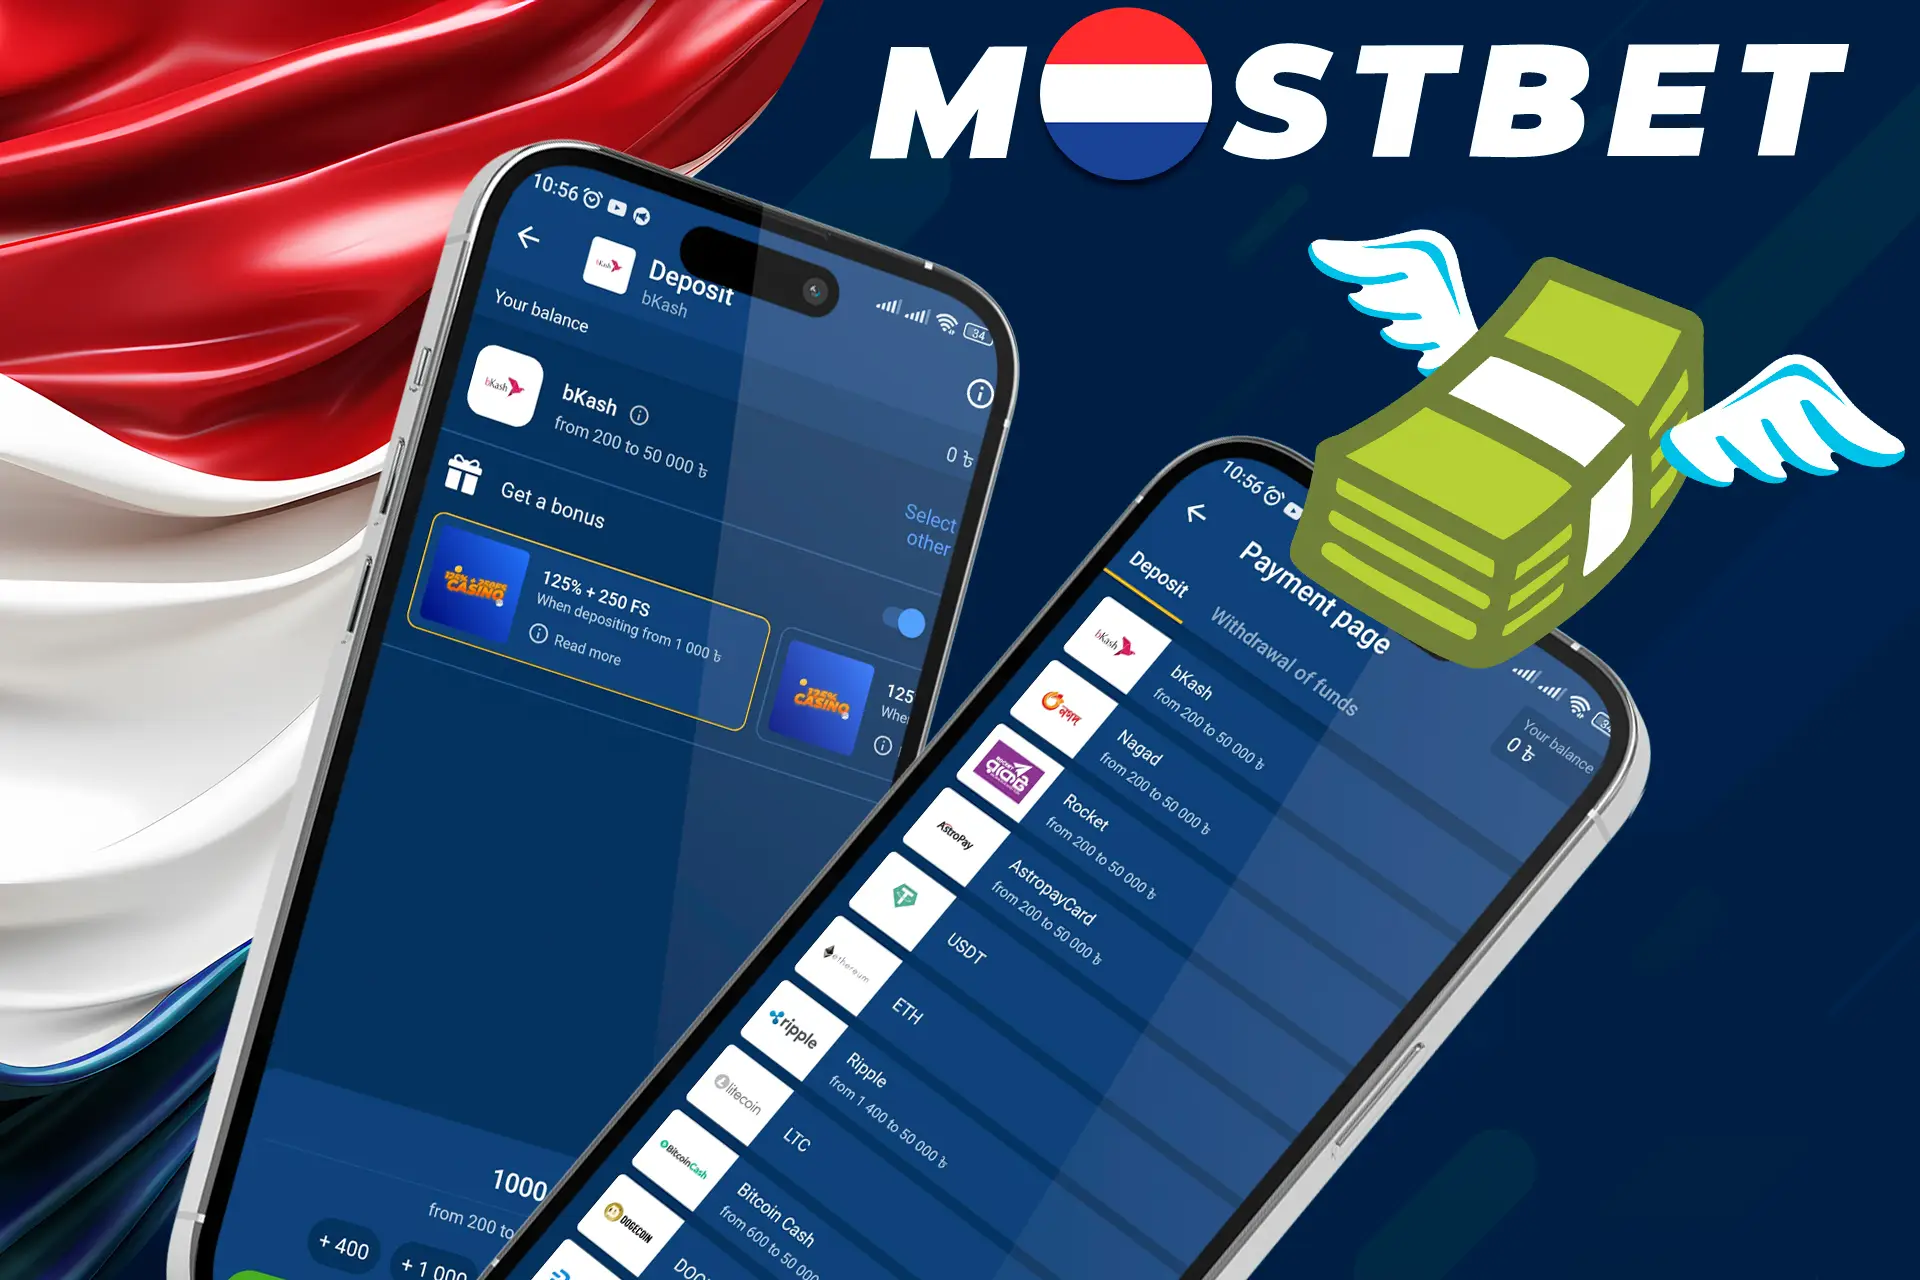 Make your first deposit to Mostbet